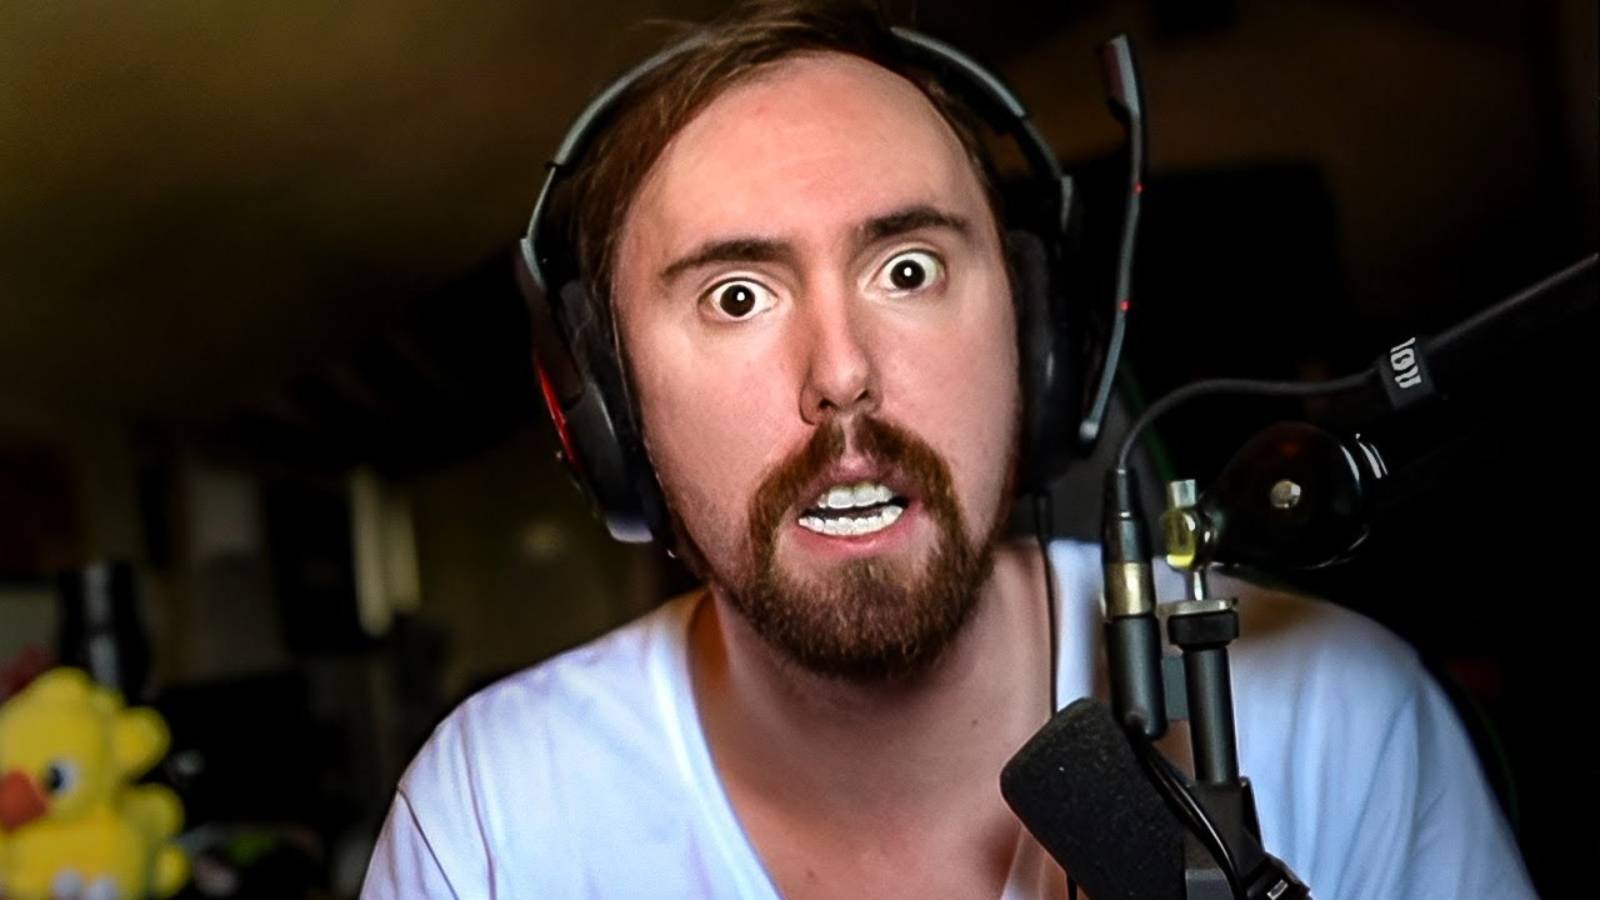 Asmongold puts Riot Games on blast after company-wide layoffs - Dexerto